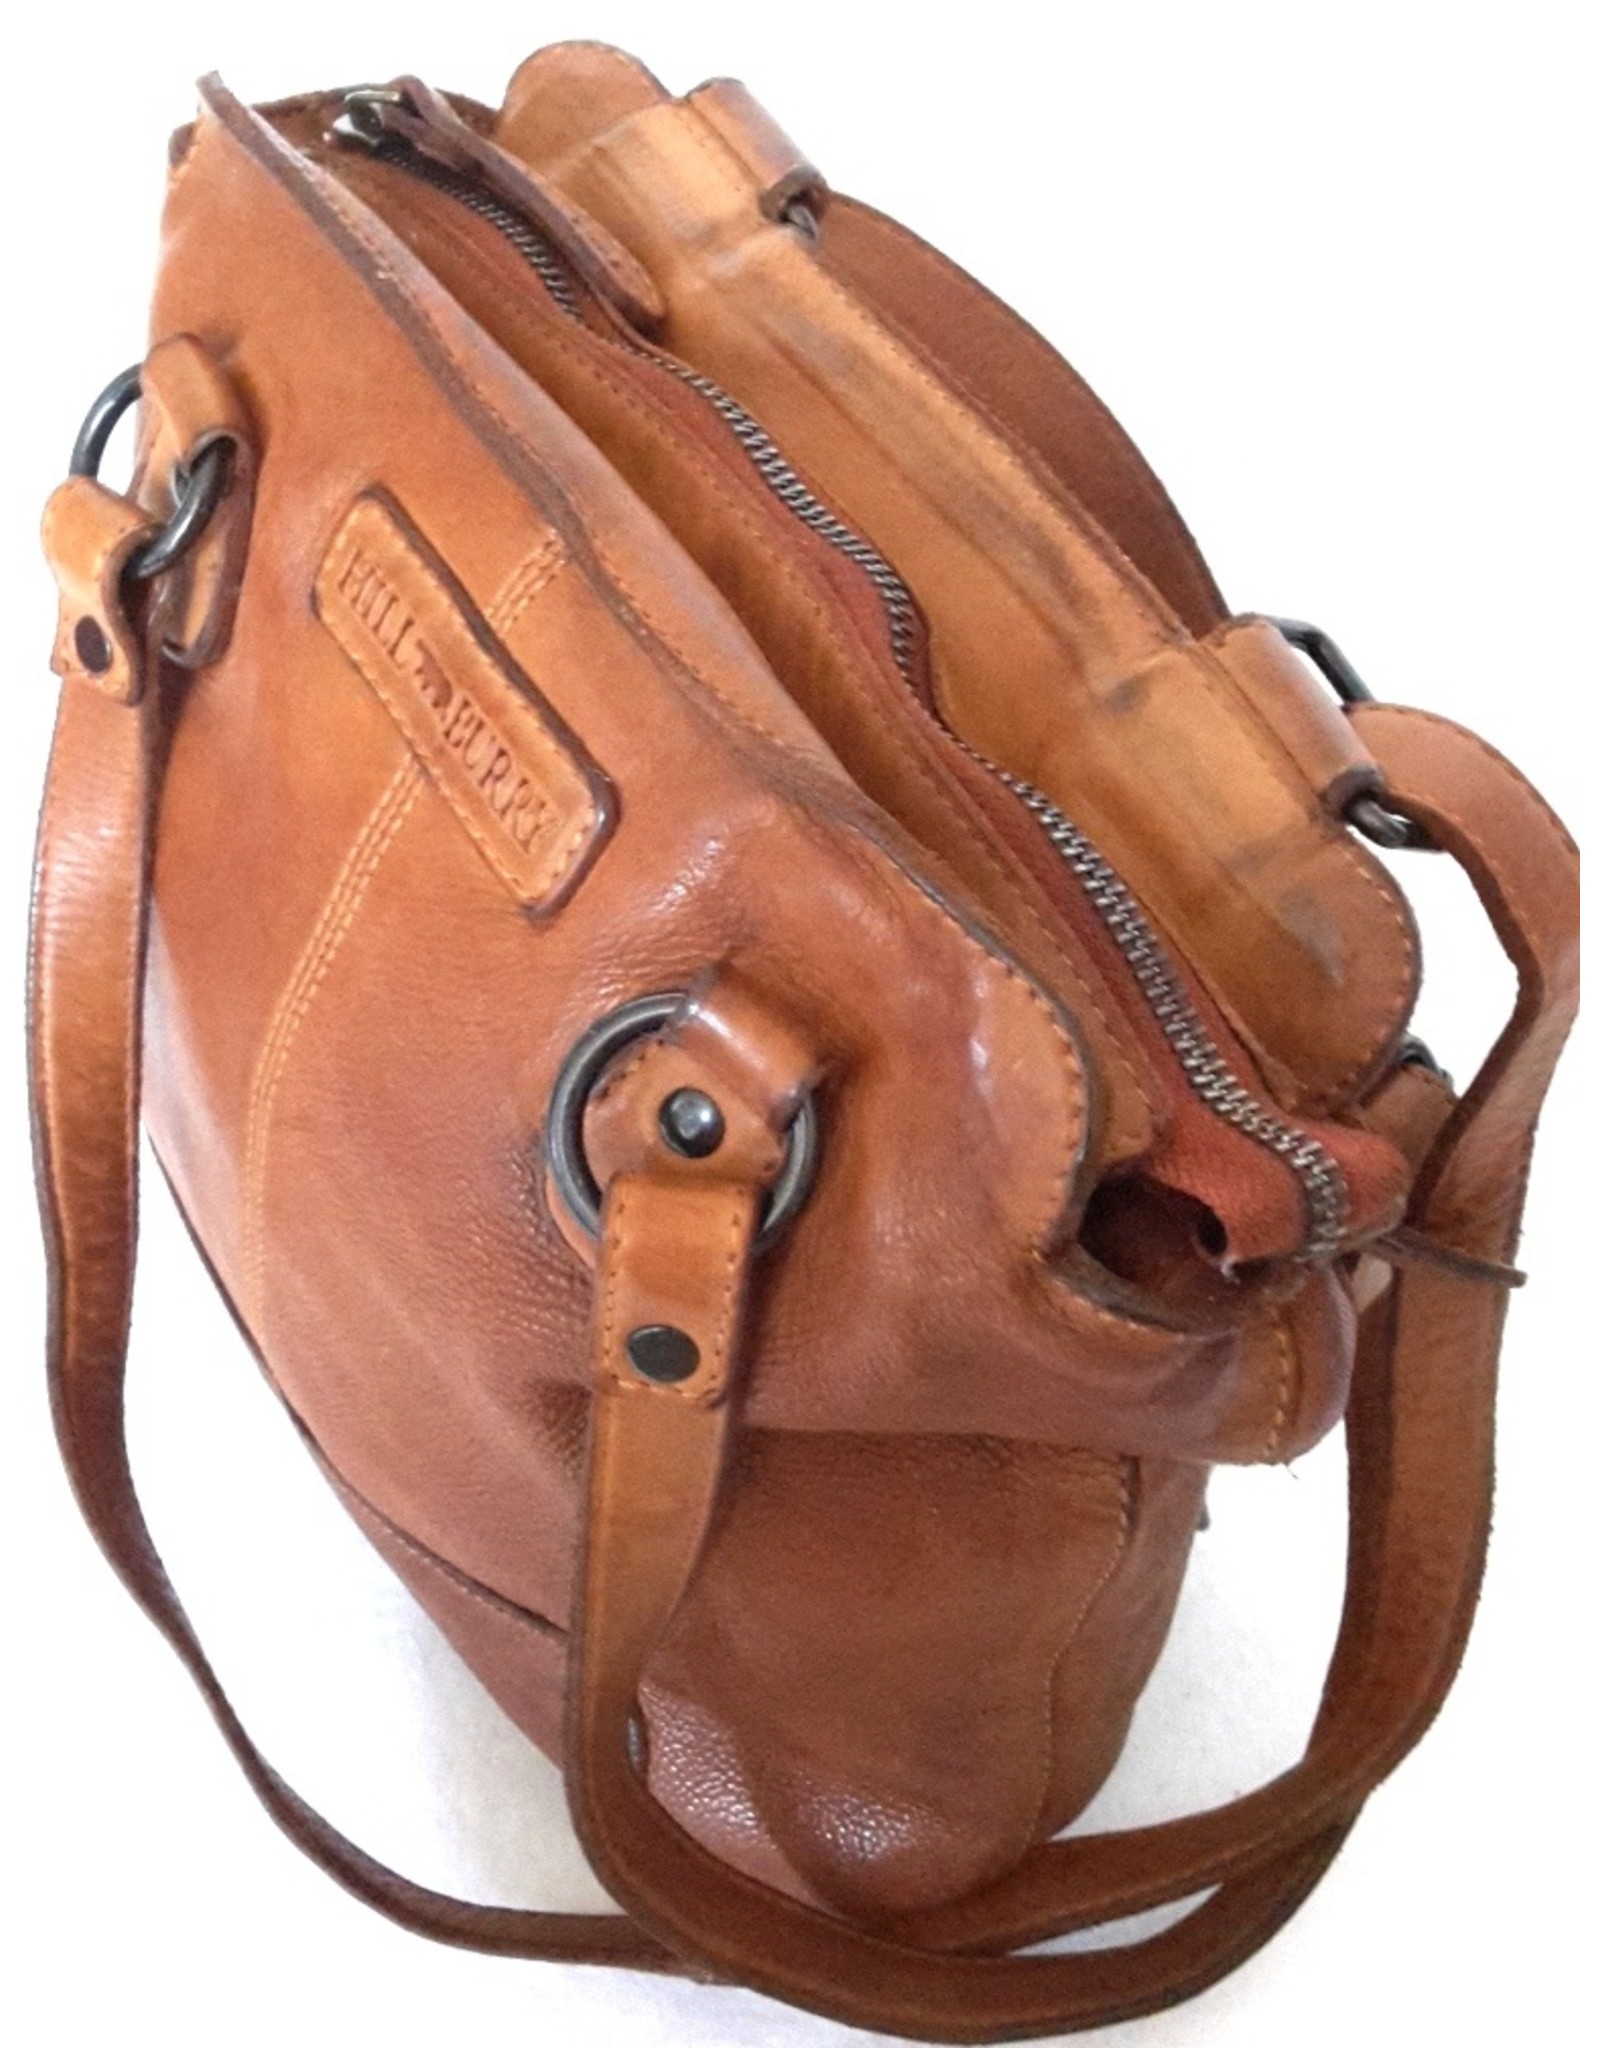 HillBurry Leather backpacks Leather shoppers - HillBurry backpack-shoulder bag washed leather (Tan)